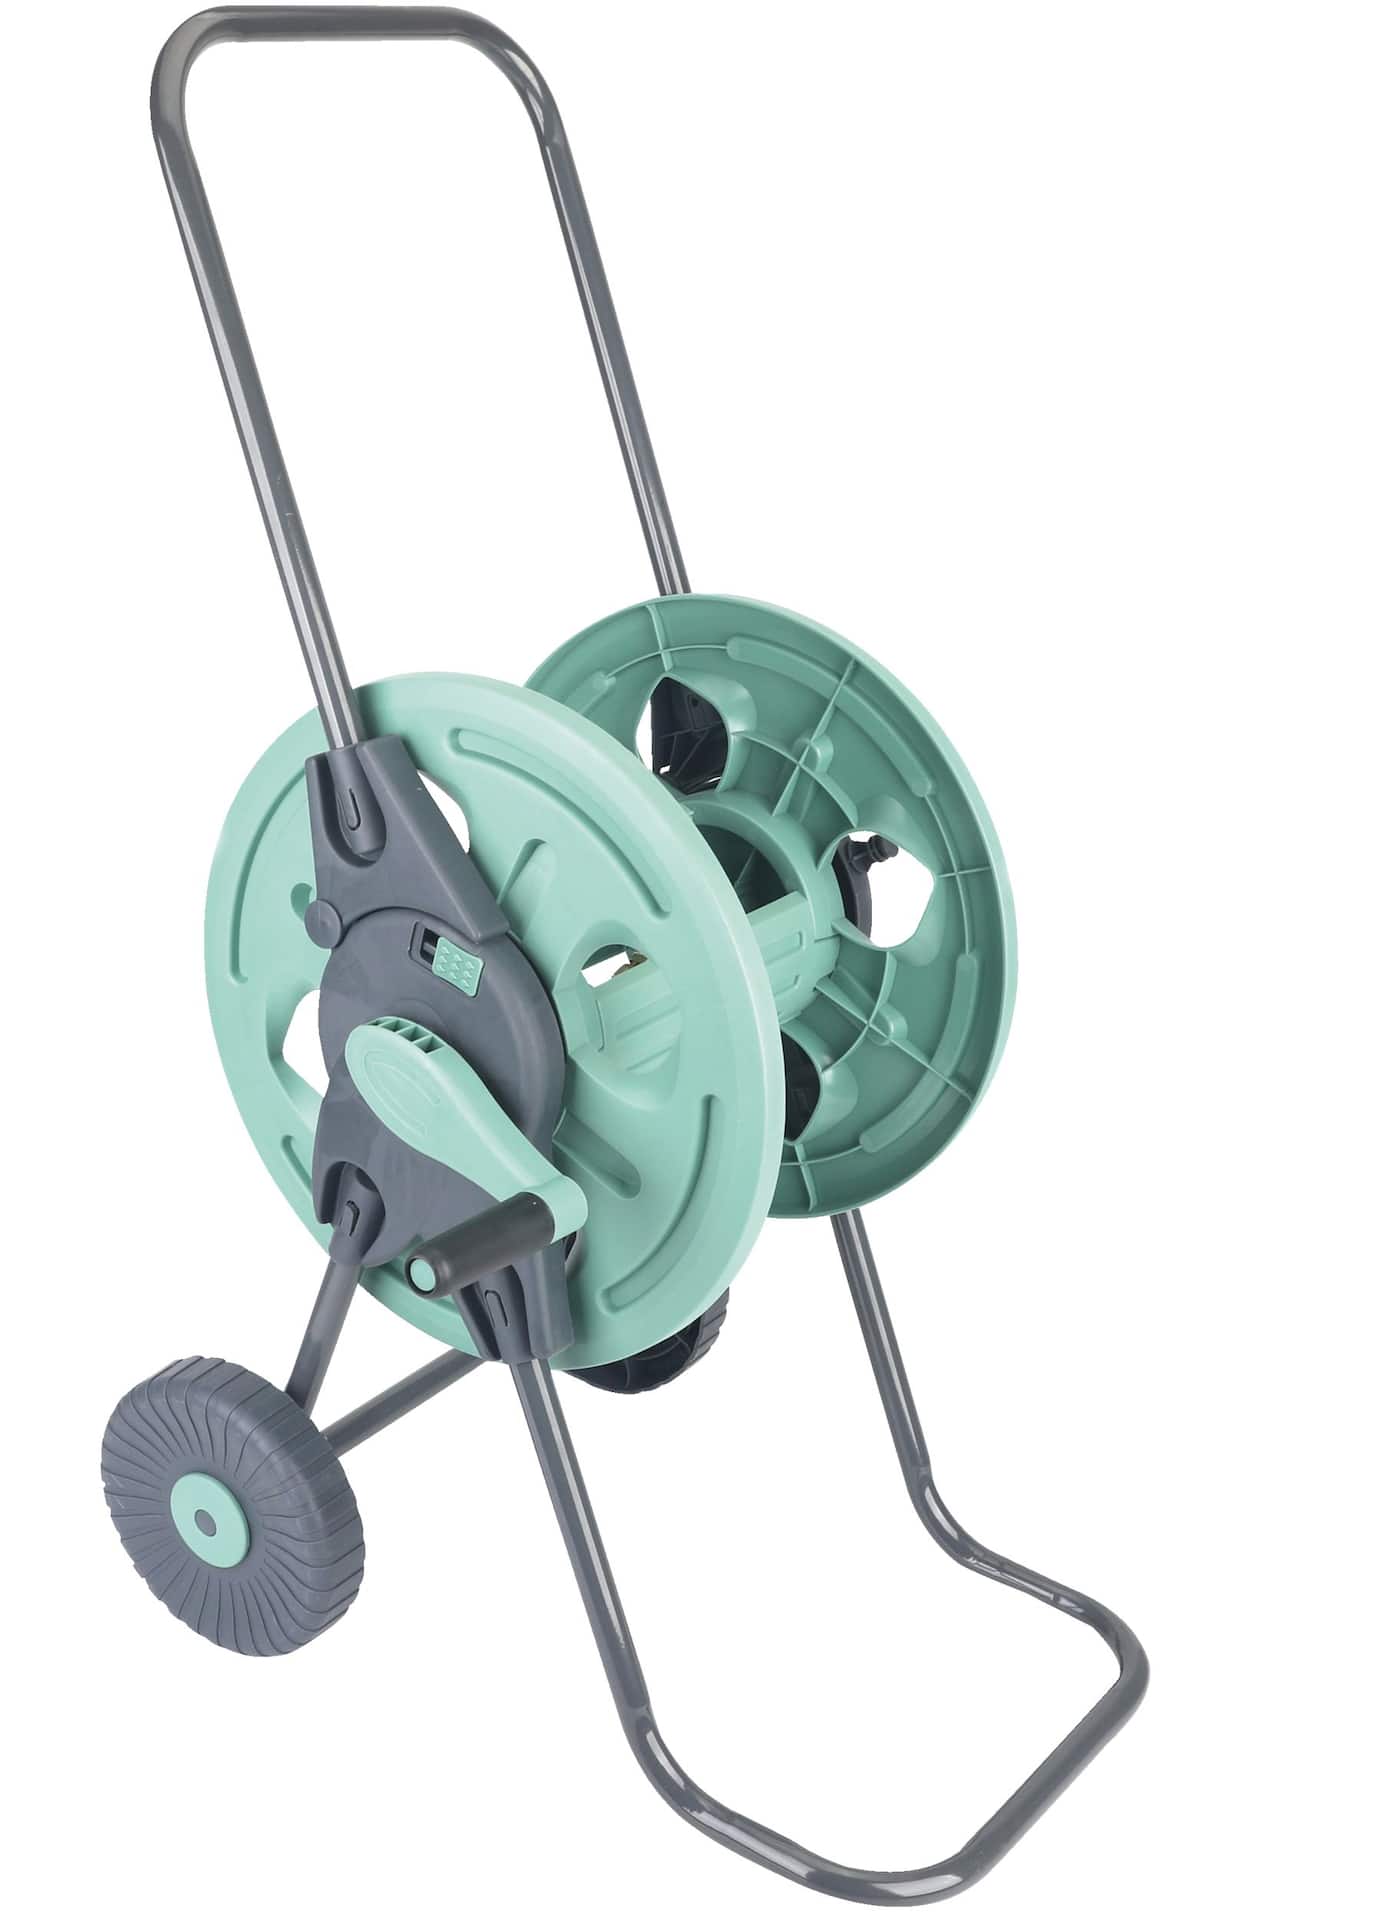 60M EMPTY GARDEN HOSE WHEELED CART HOSE PIPE REEL TROLLEY WITH